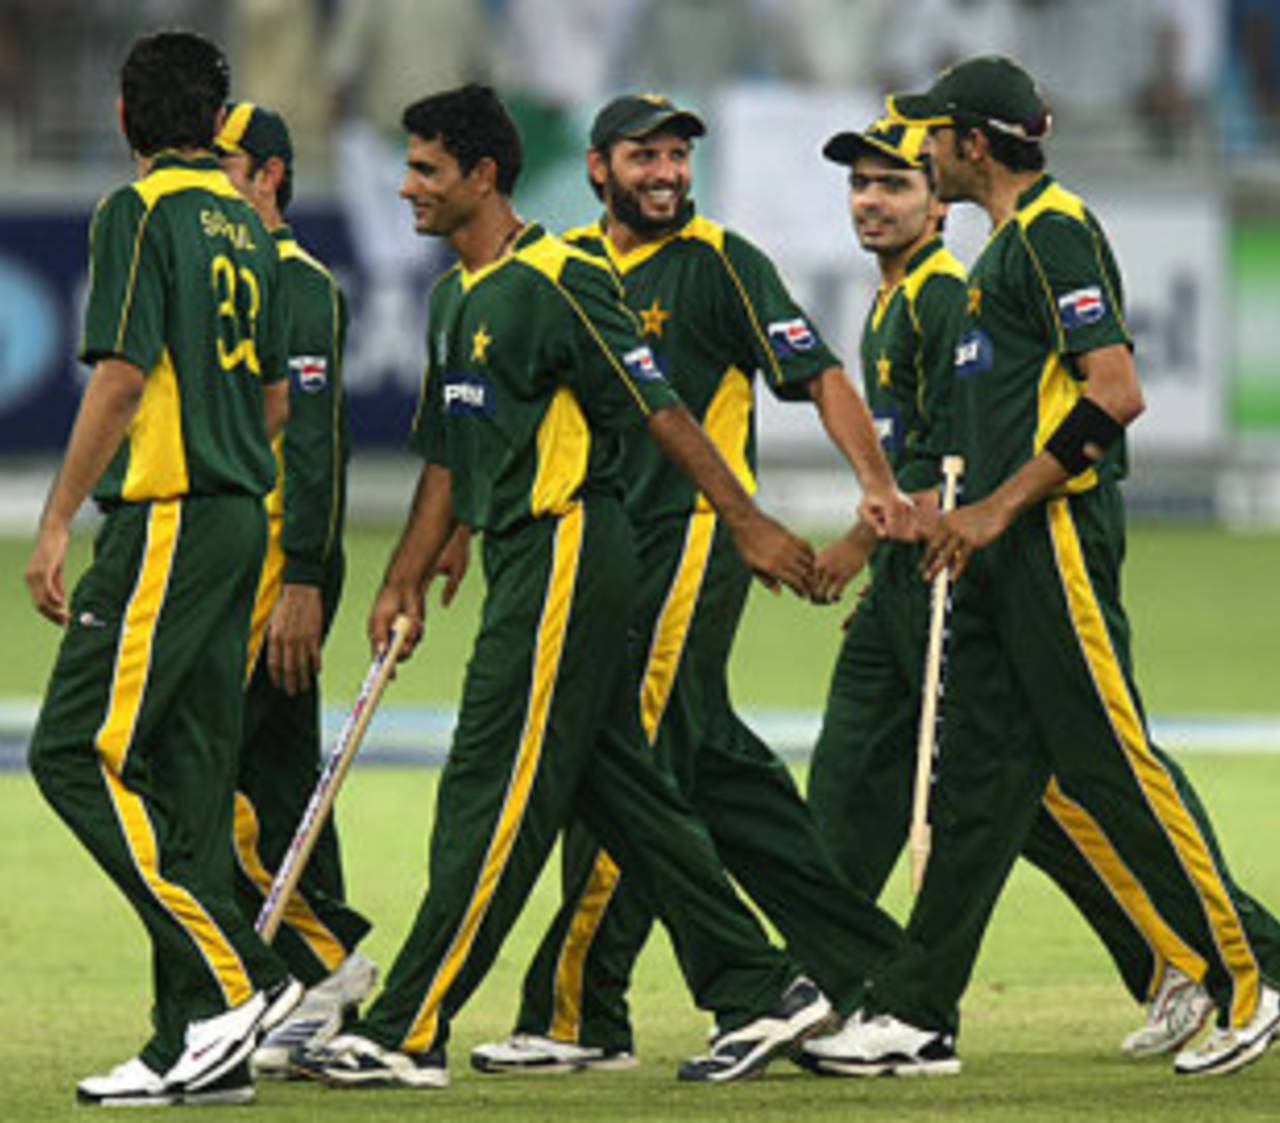 Mugged: The plight of Pakistan's players evokes sympathy but at the risk of losing objectivity&nbsp;&nbsp;&bull;&nbsp;&nbsp;Associated Press